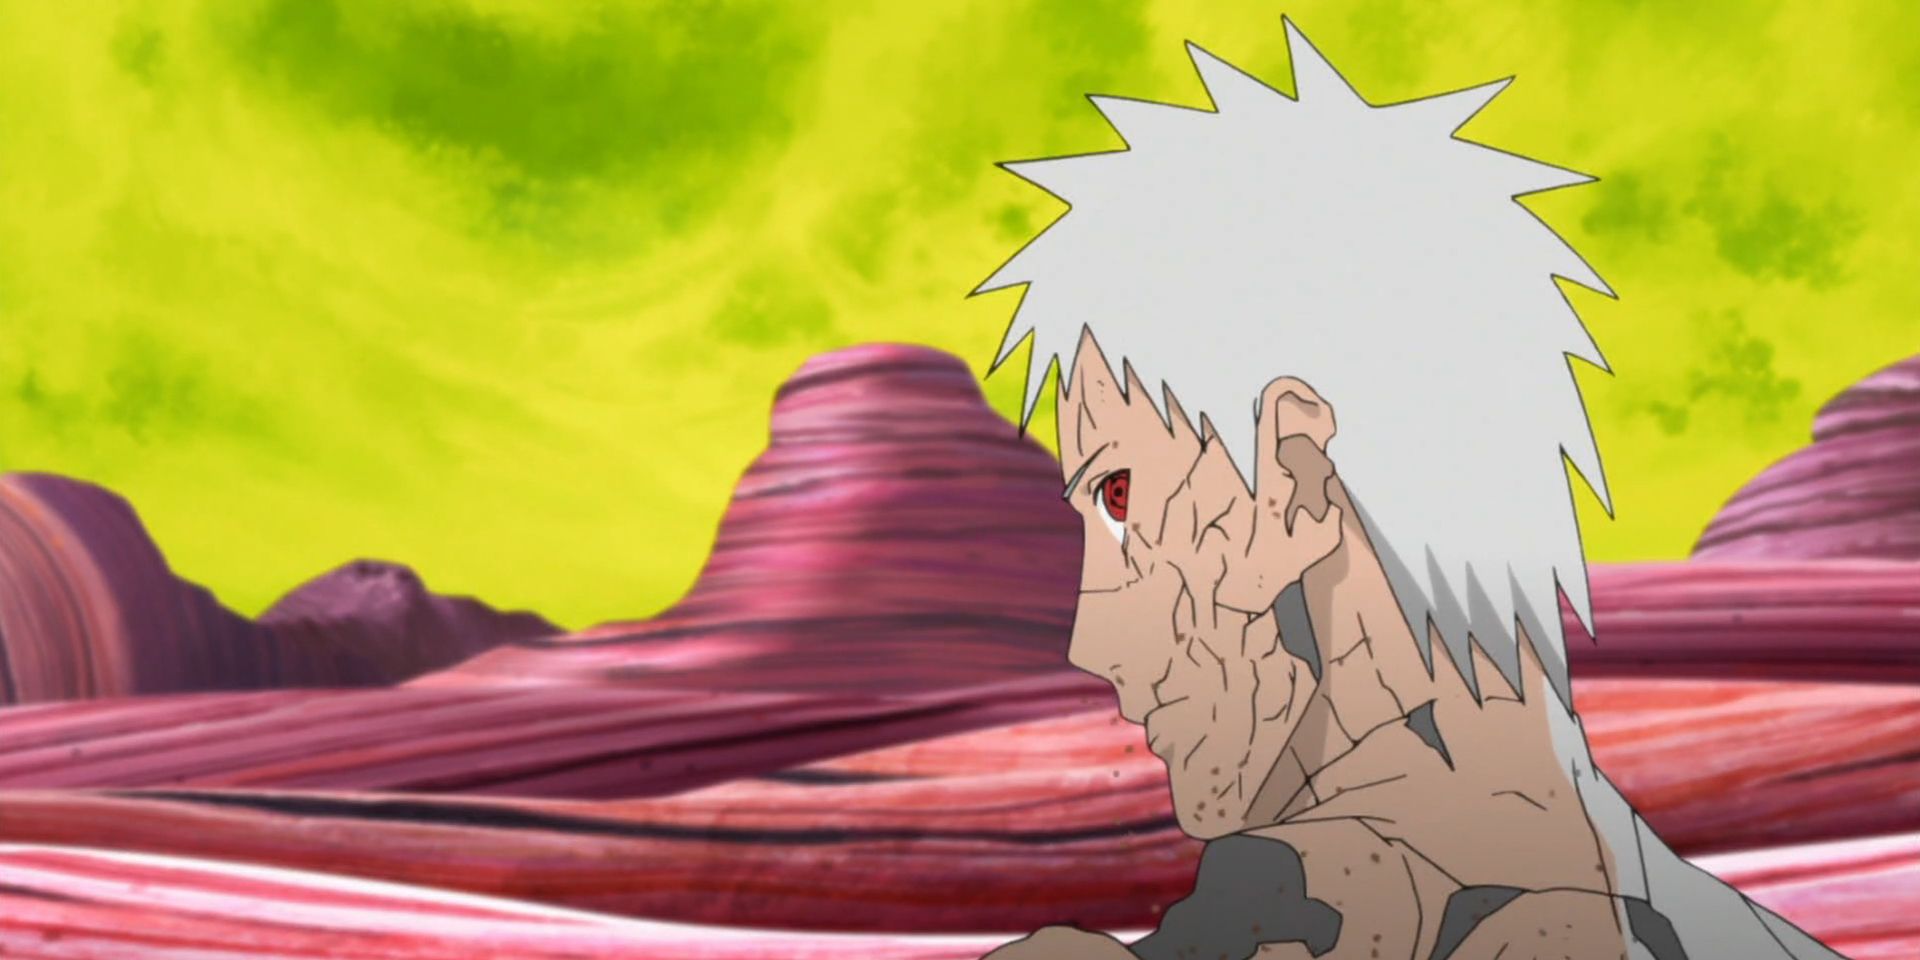 Naruto 10 Heroic Acts Committed By Villains